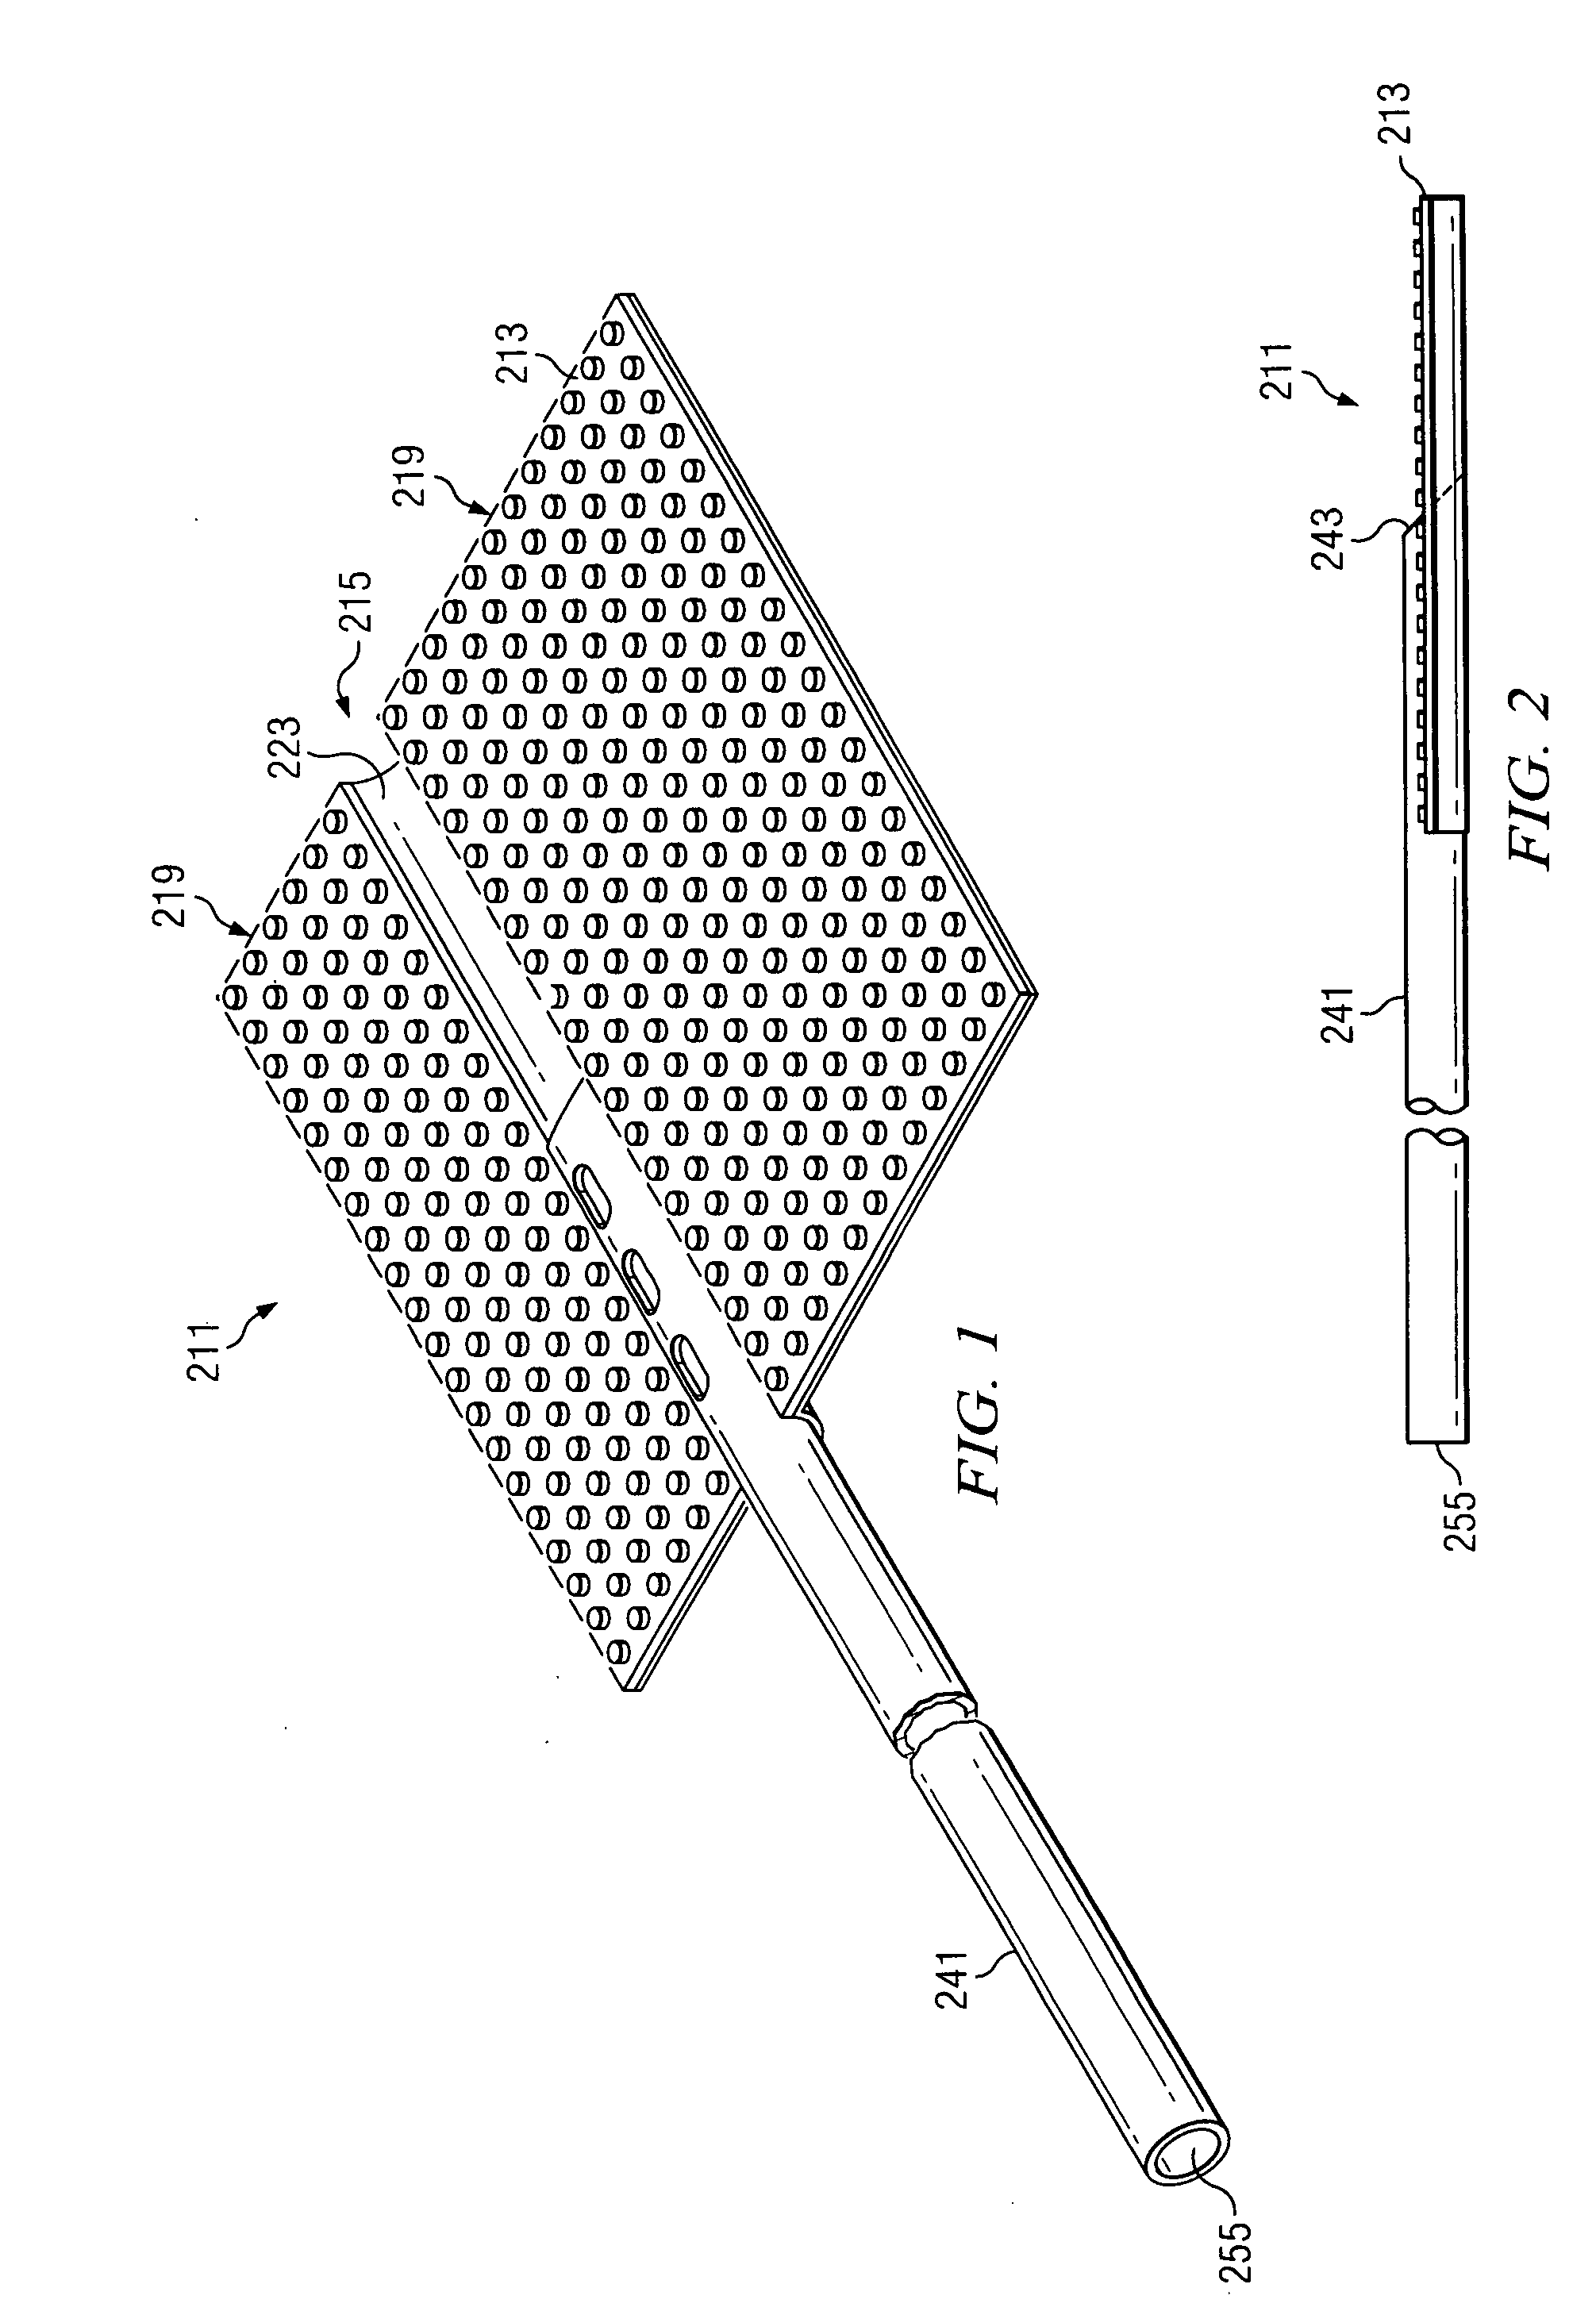 System for percutaneously administering reduced pressure treatment using balloon dissection